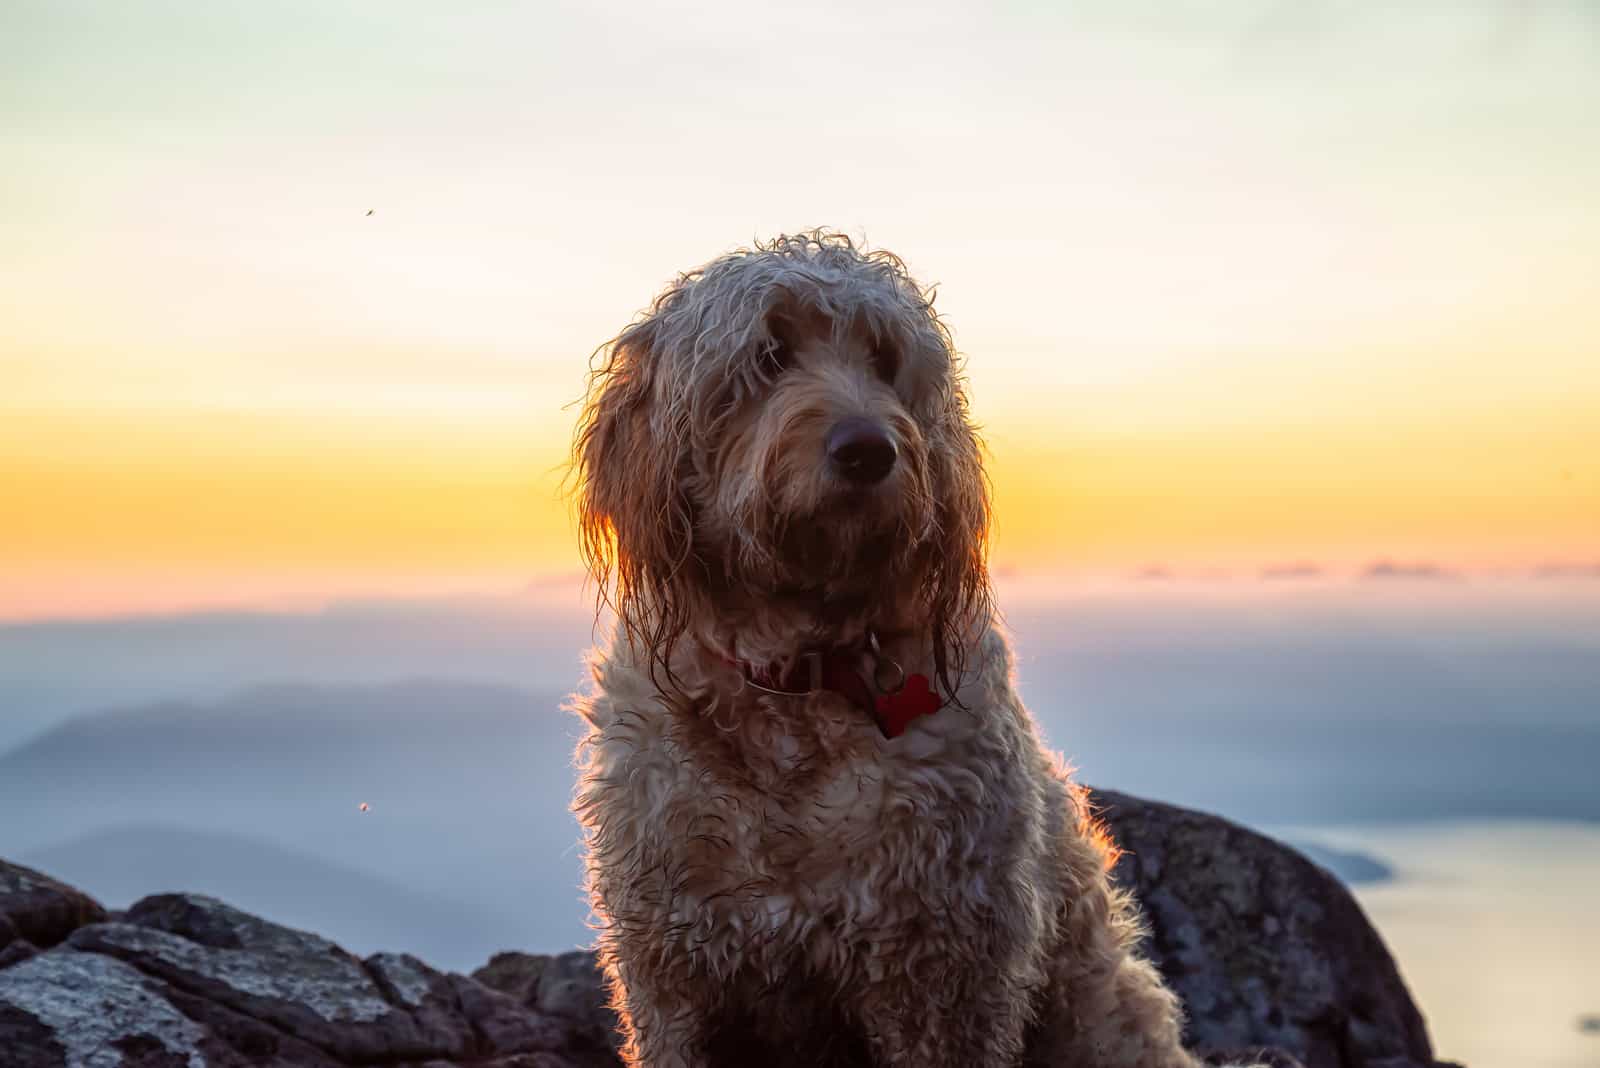 Goldendoodle stands on a rock